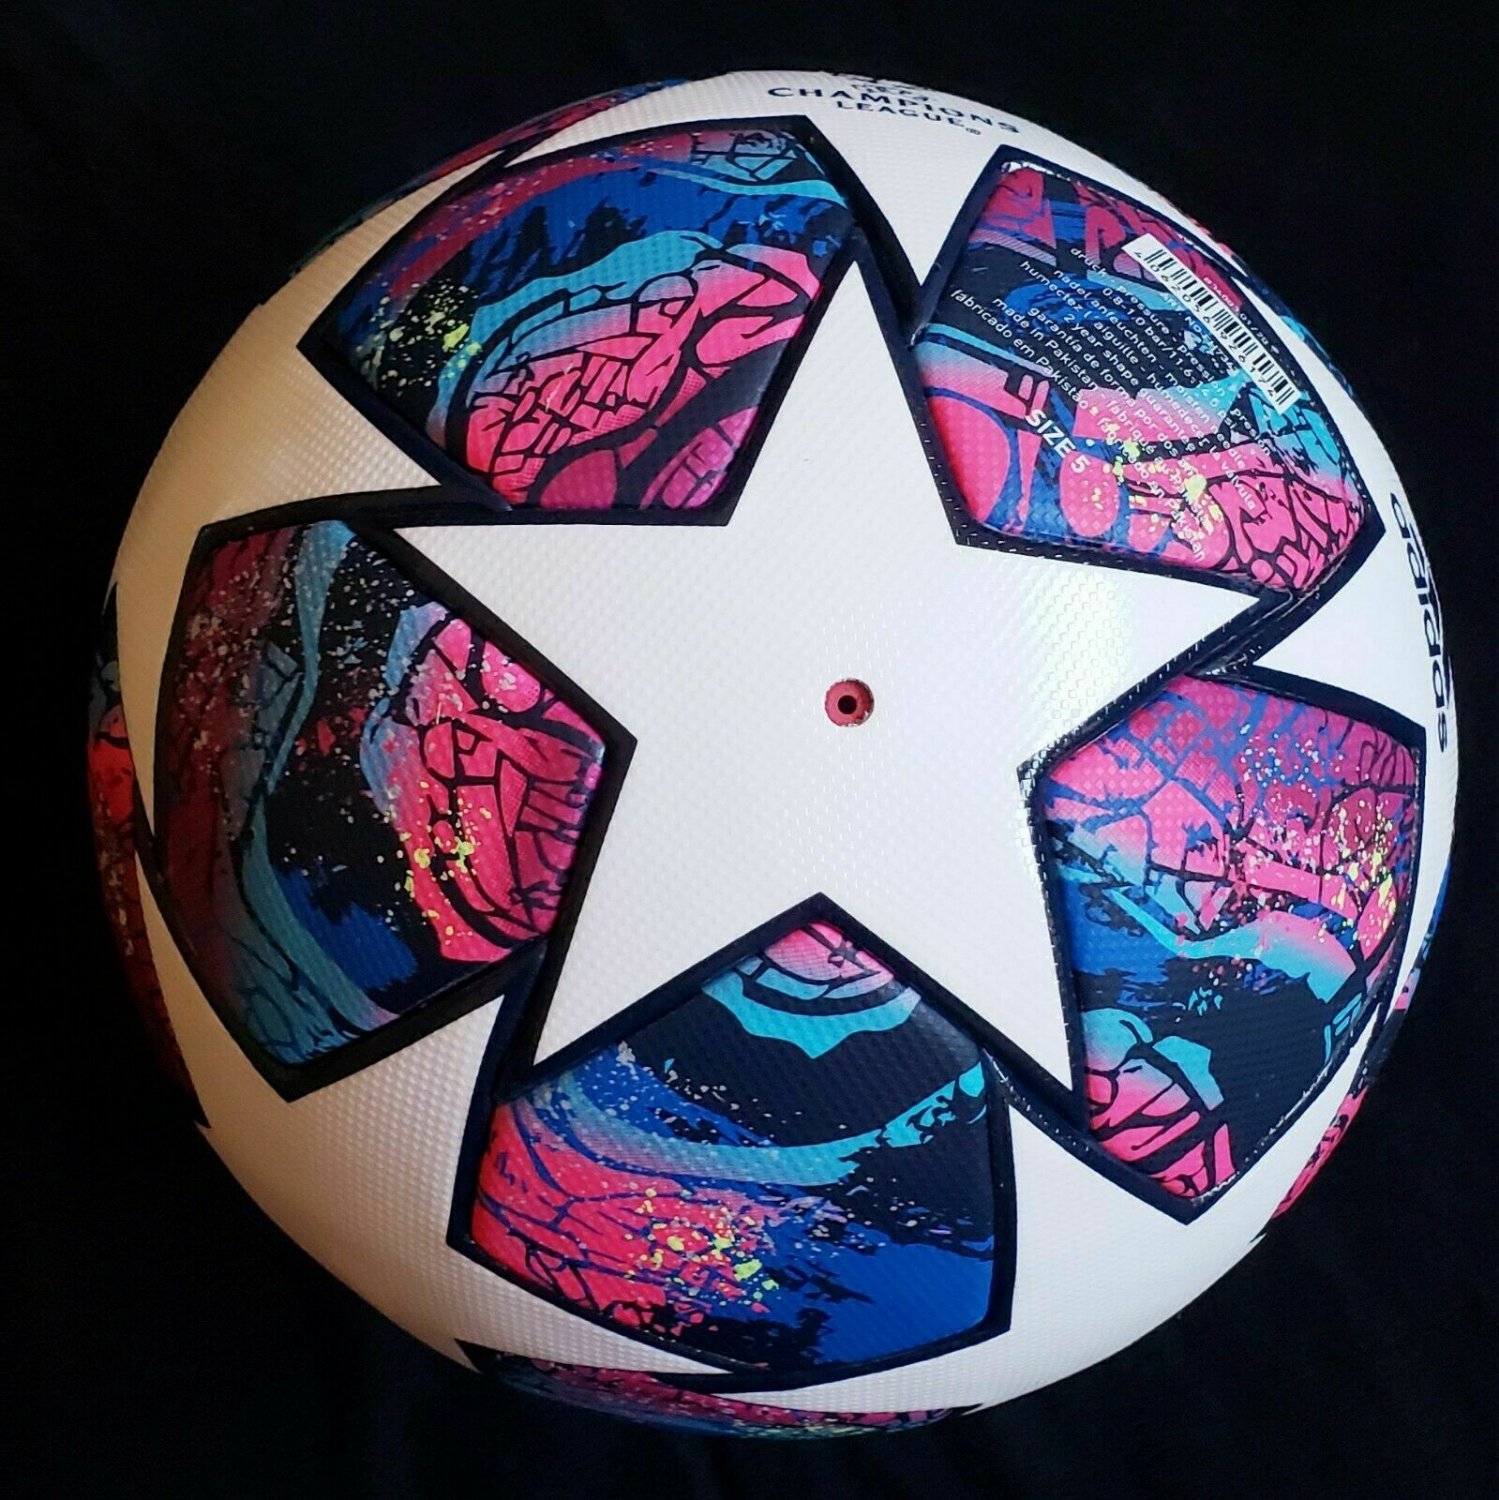 Adidas Champions League Final Istanbul 20 Official Match Ball SIZE 5